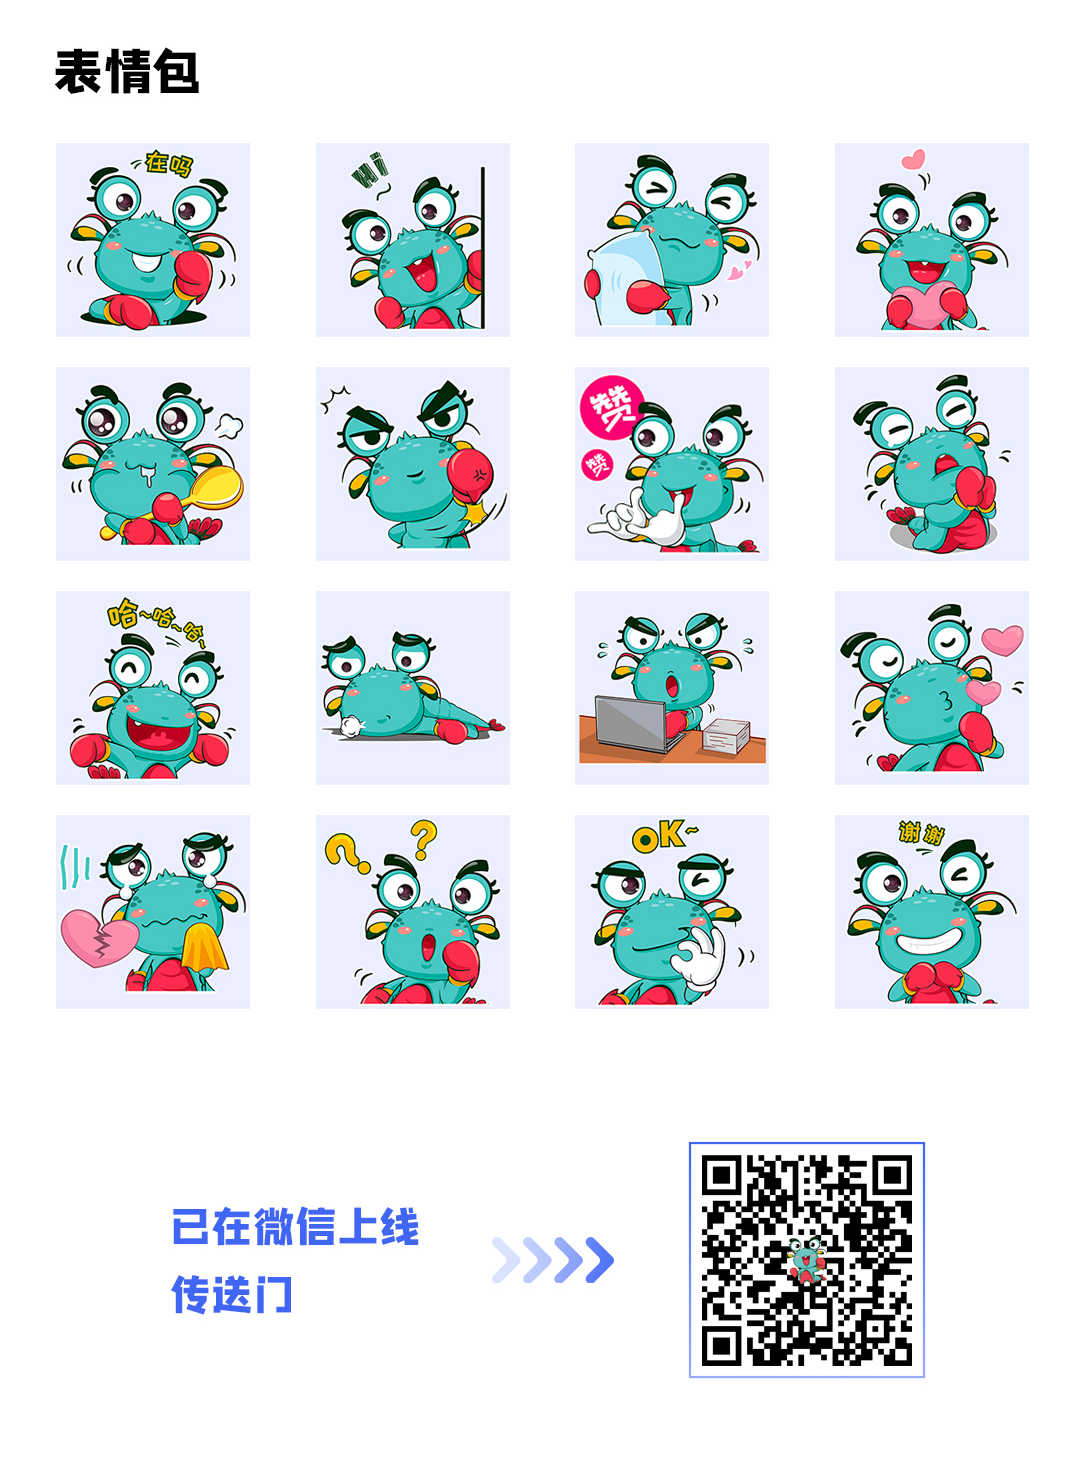 Official Announcement: SEETRUM Mascot "Xiao Yu" Has Made its Debut!(图3)